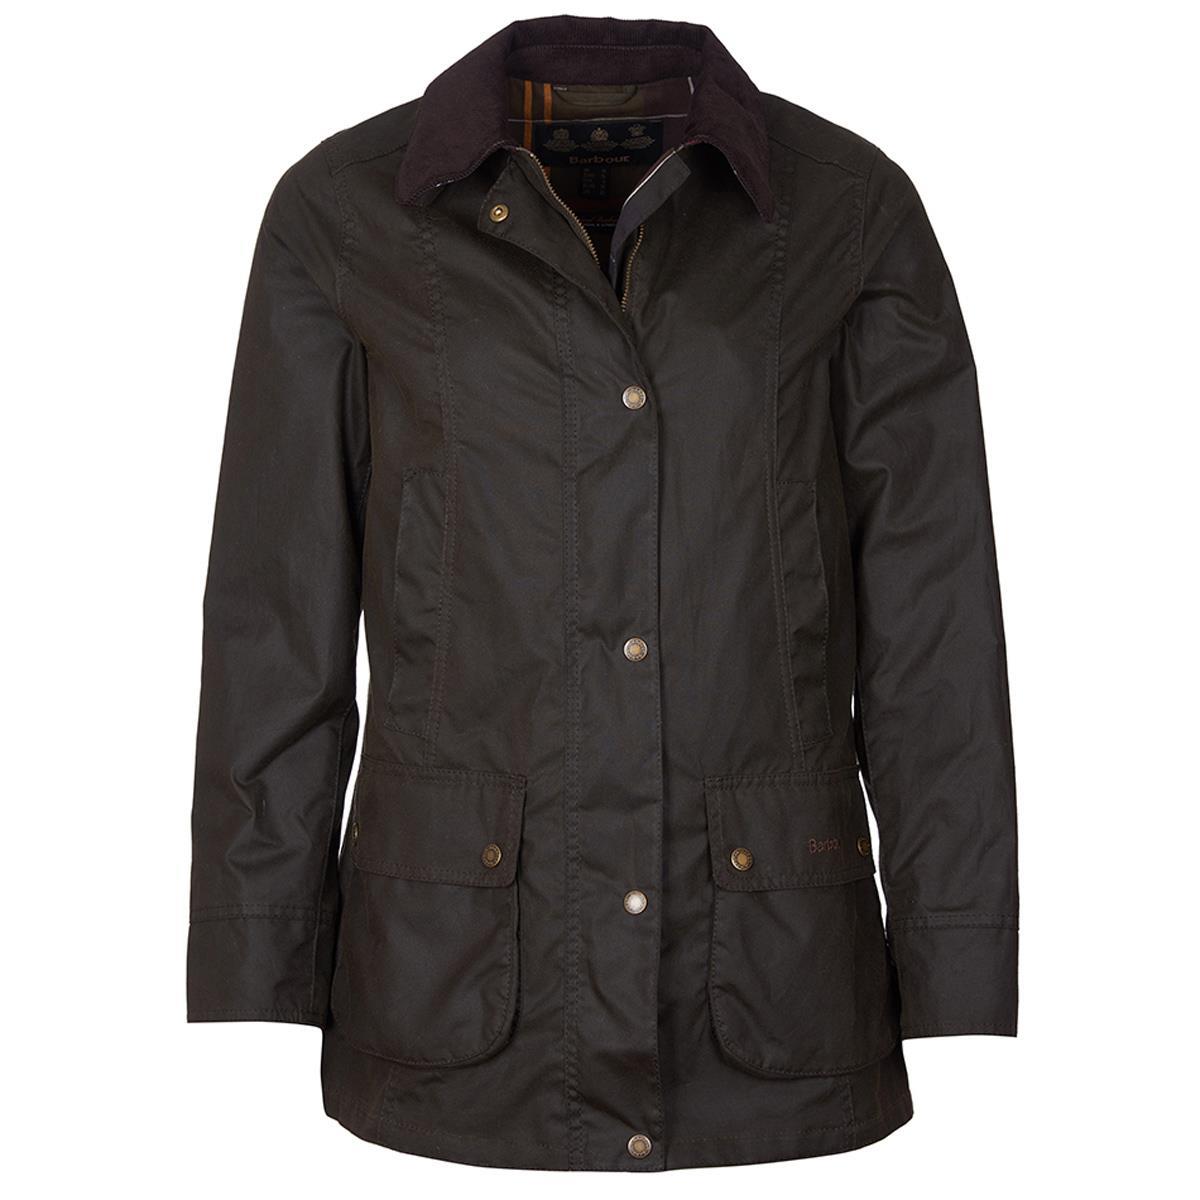 What are the traits of the barbour fiddich women's wax jacket?